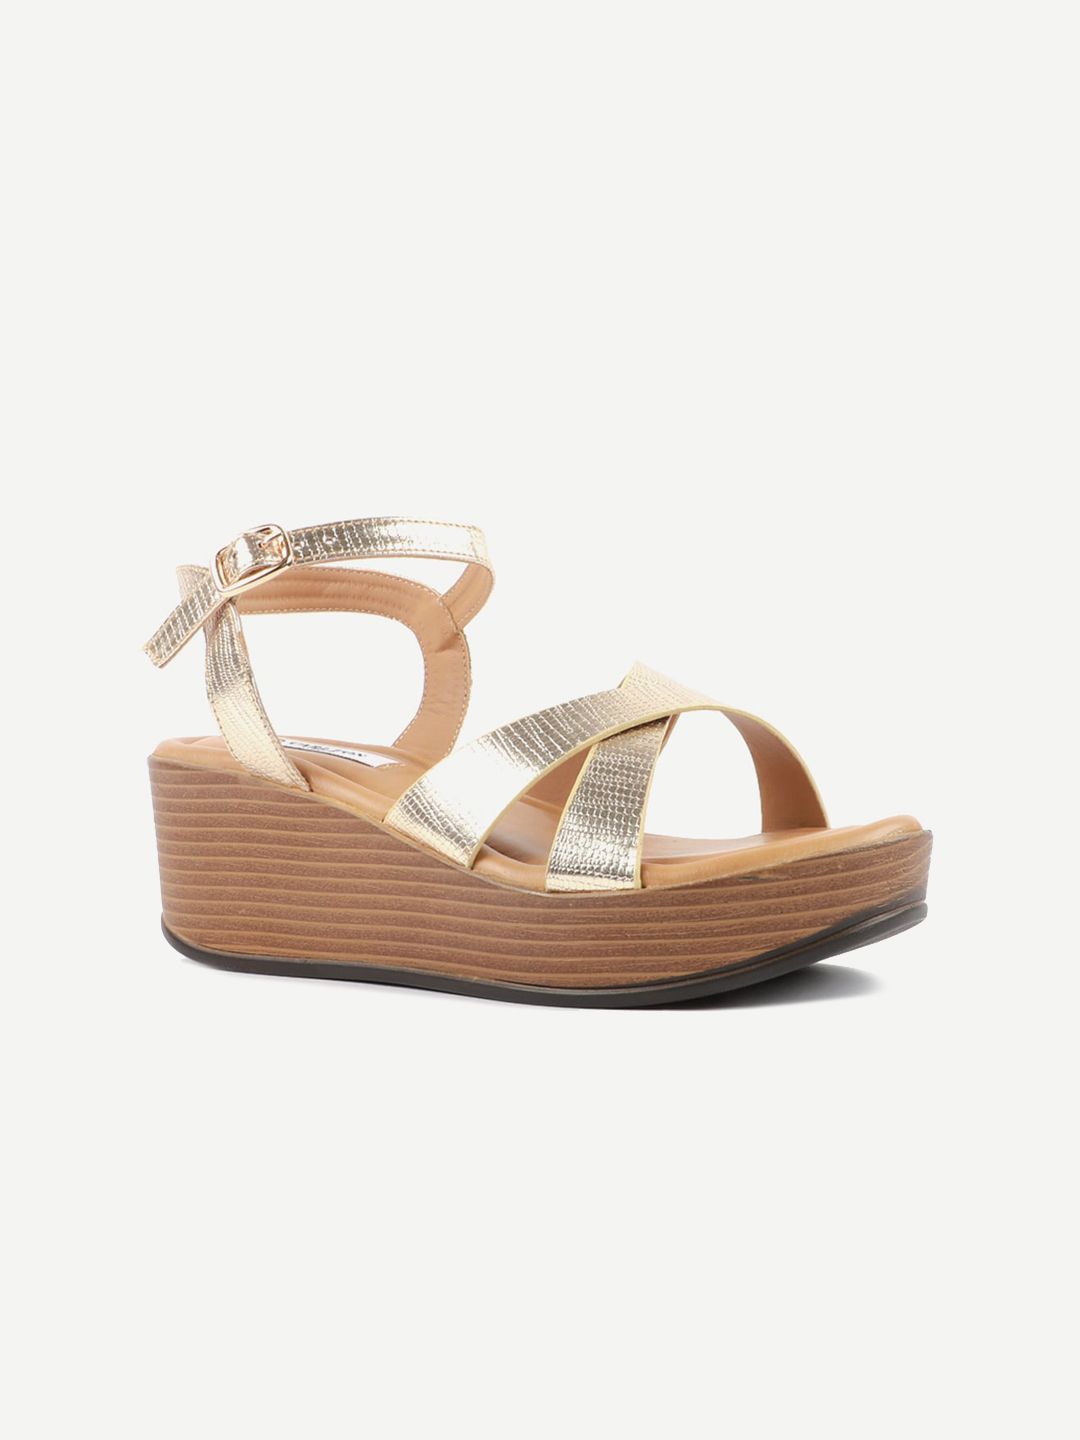 Carlton London Gold-Toned Wedge Sandals Price in India